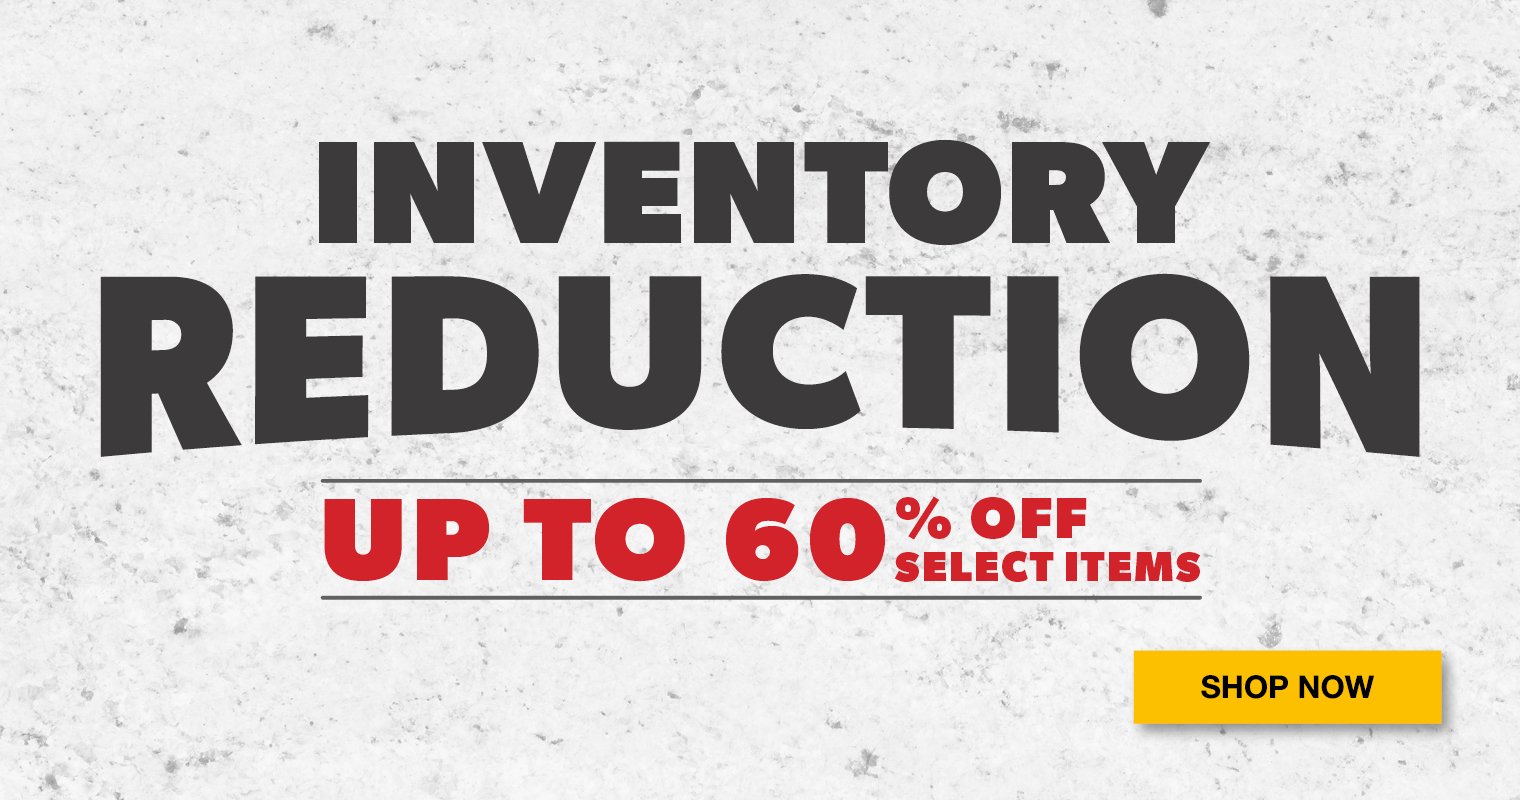 Inventory Reduction - Up to 60% Off